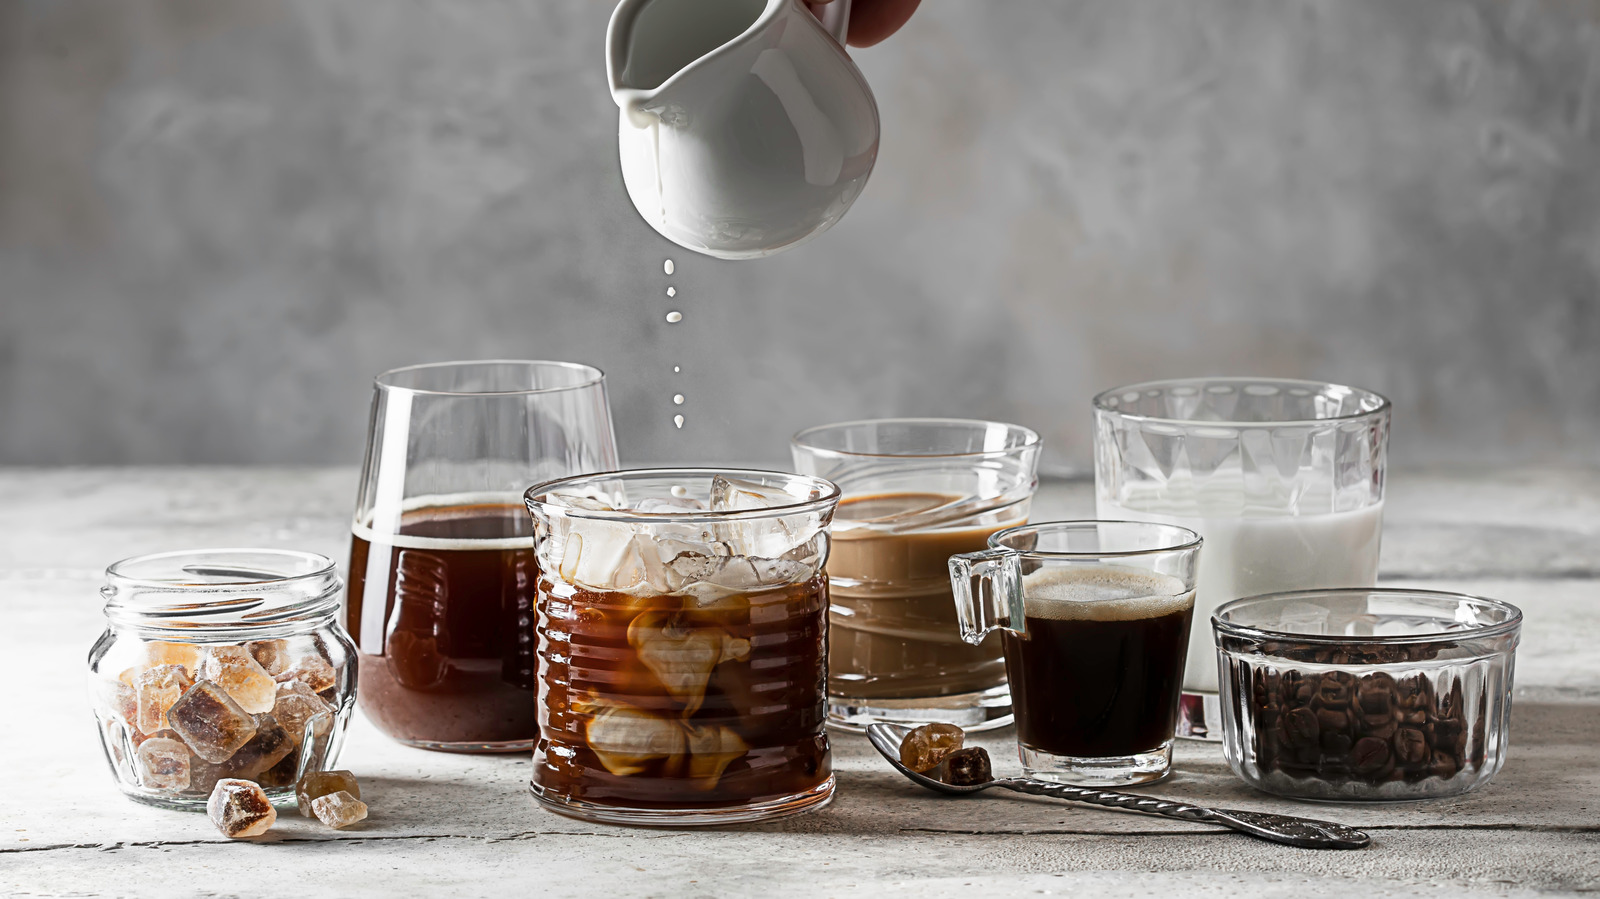 These Instant Iced Lattes Shouldn't Work, but They Do